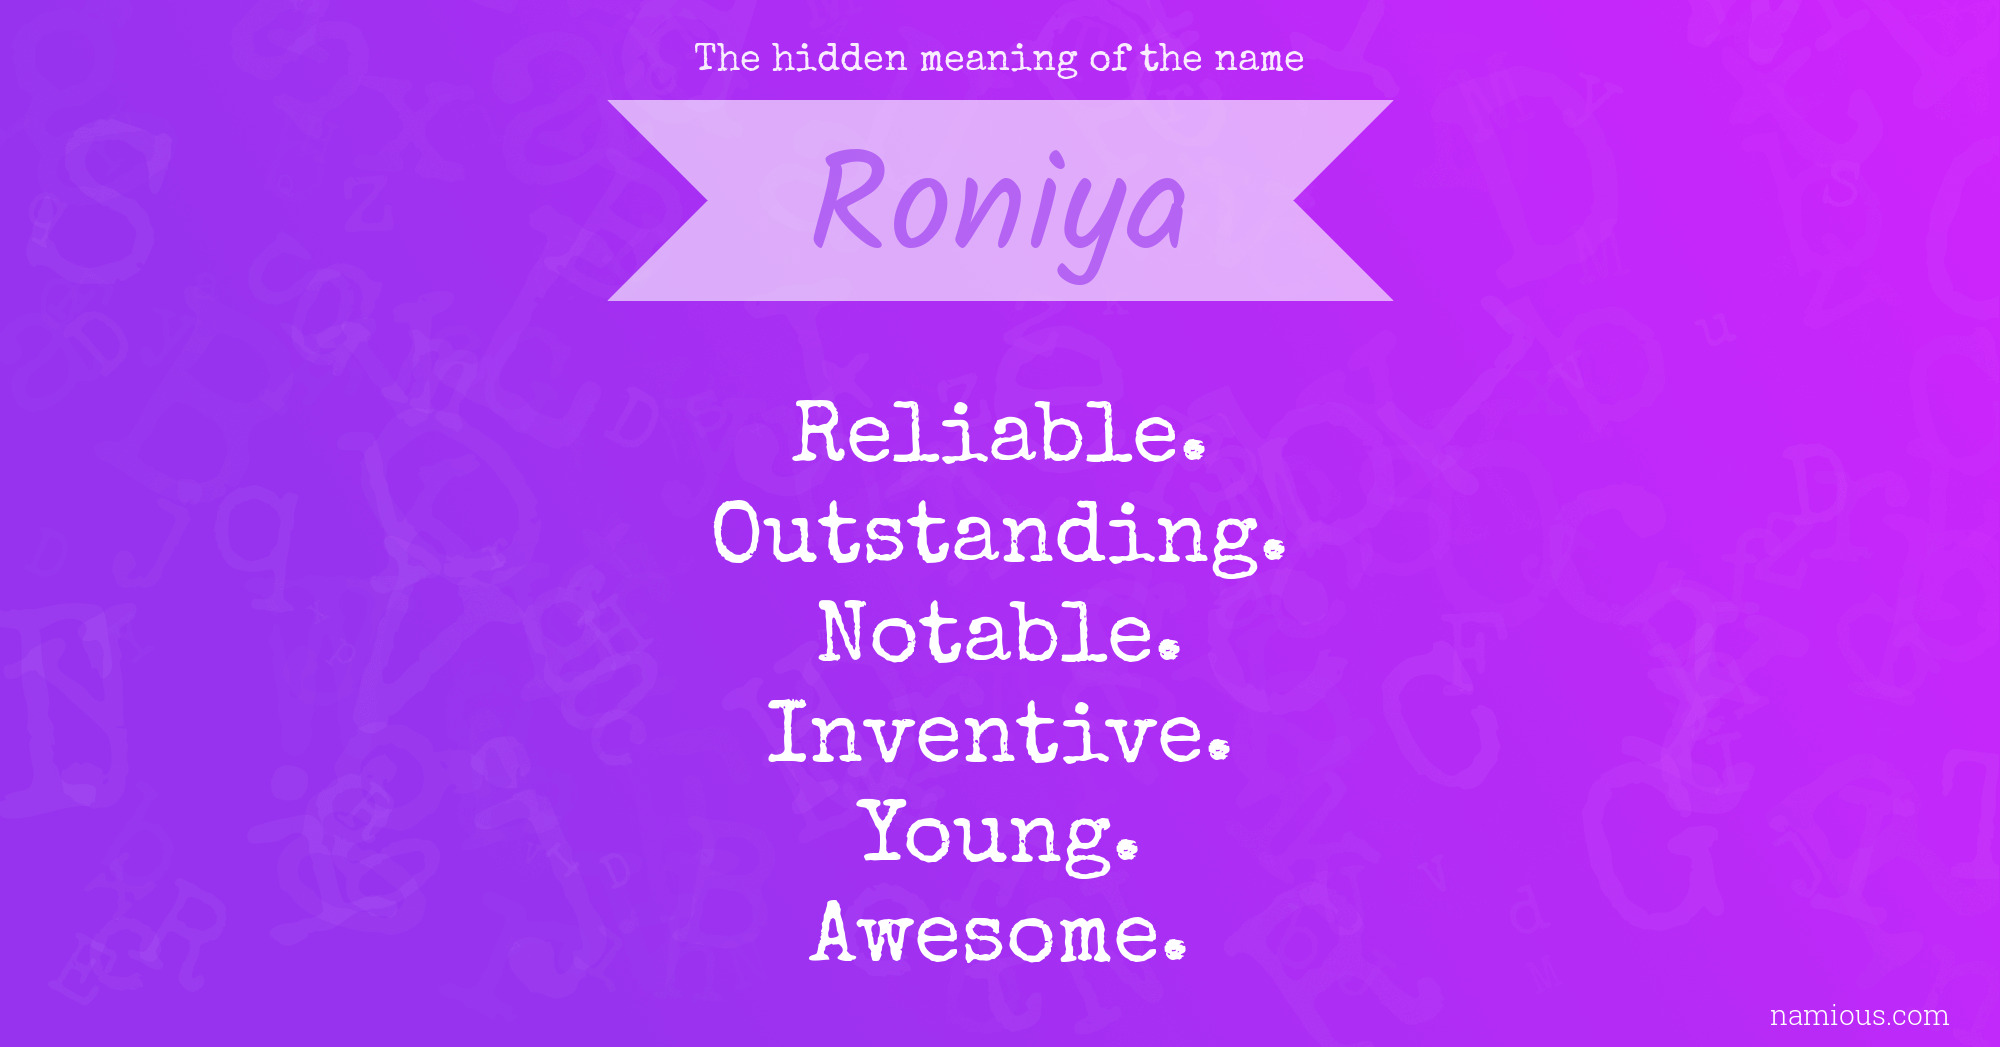 The hidden meaning of the name Roniya